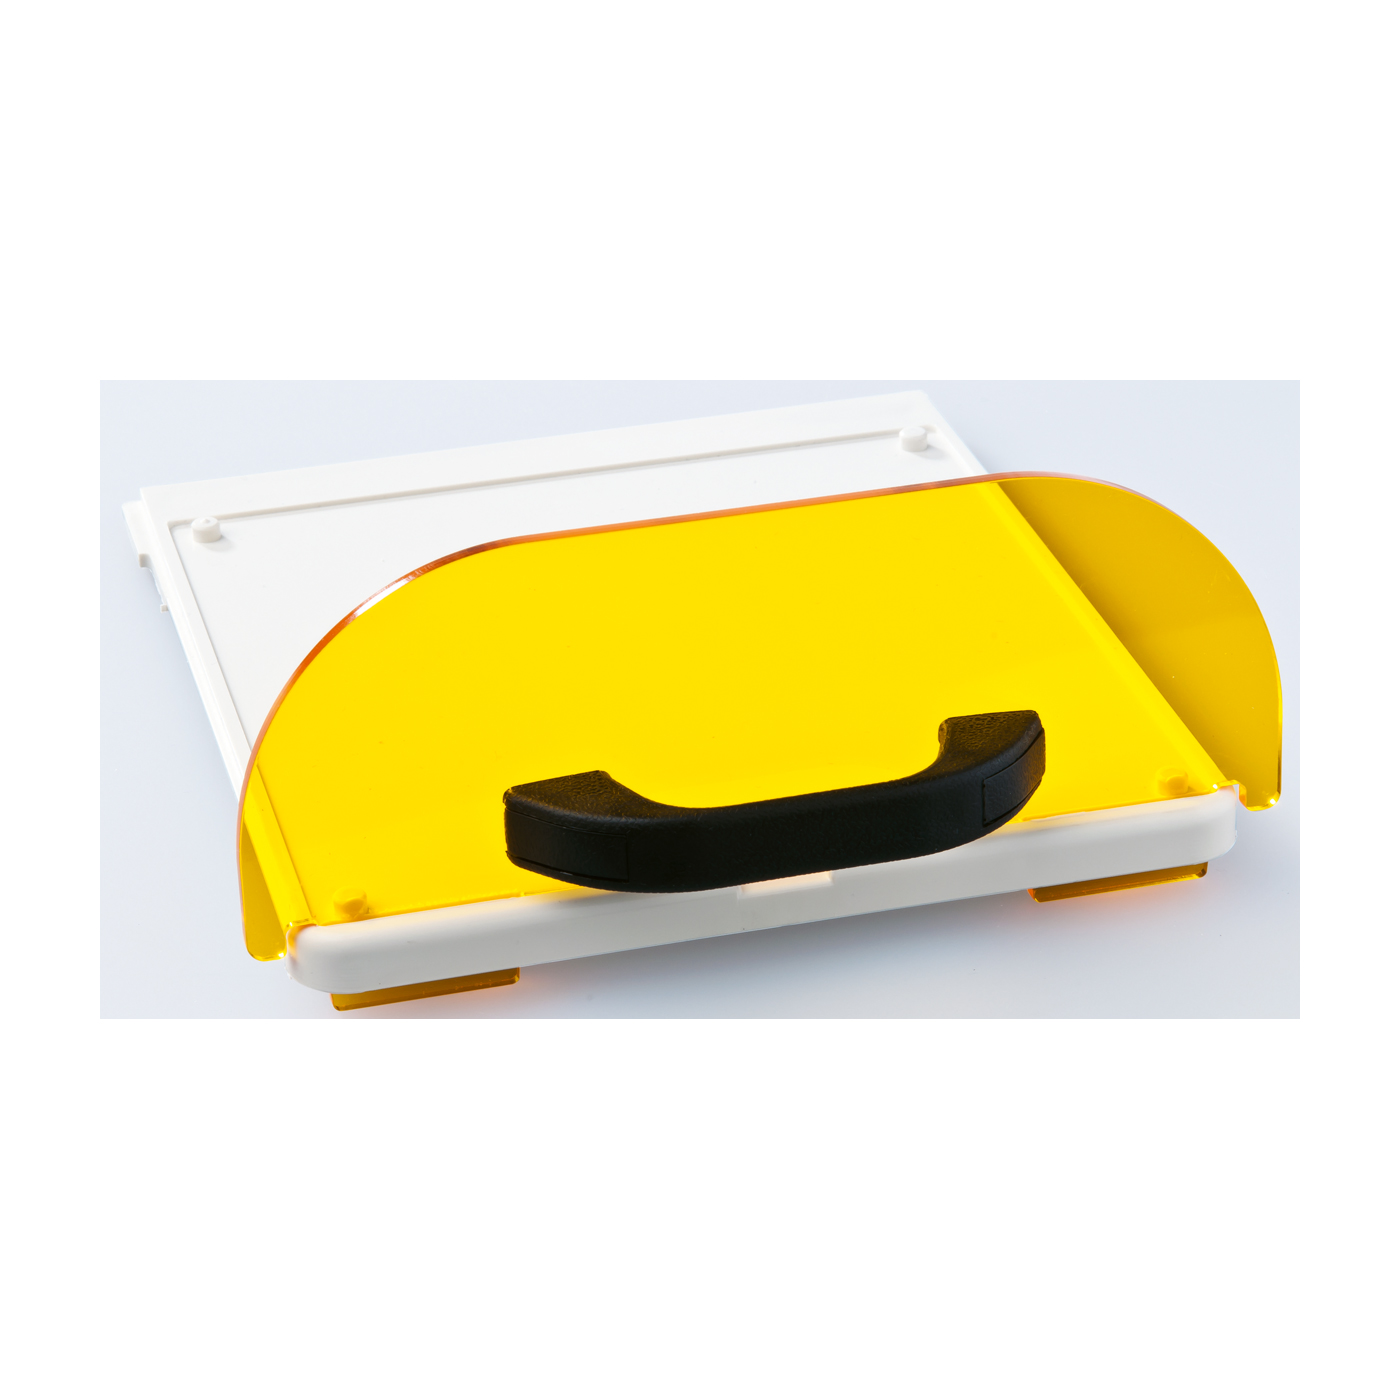 FINOHIT Drawer with Cover, Yellow - 1 piece